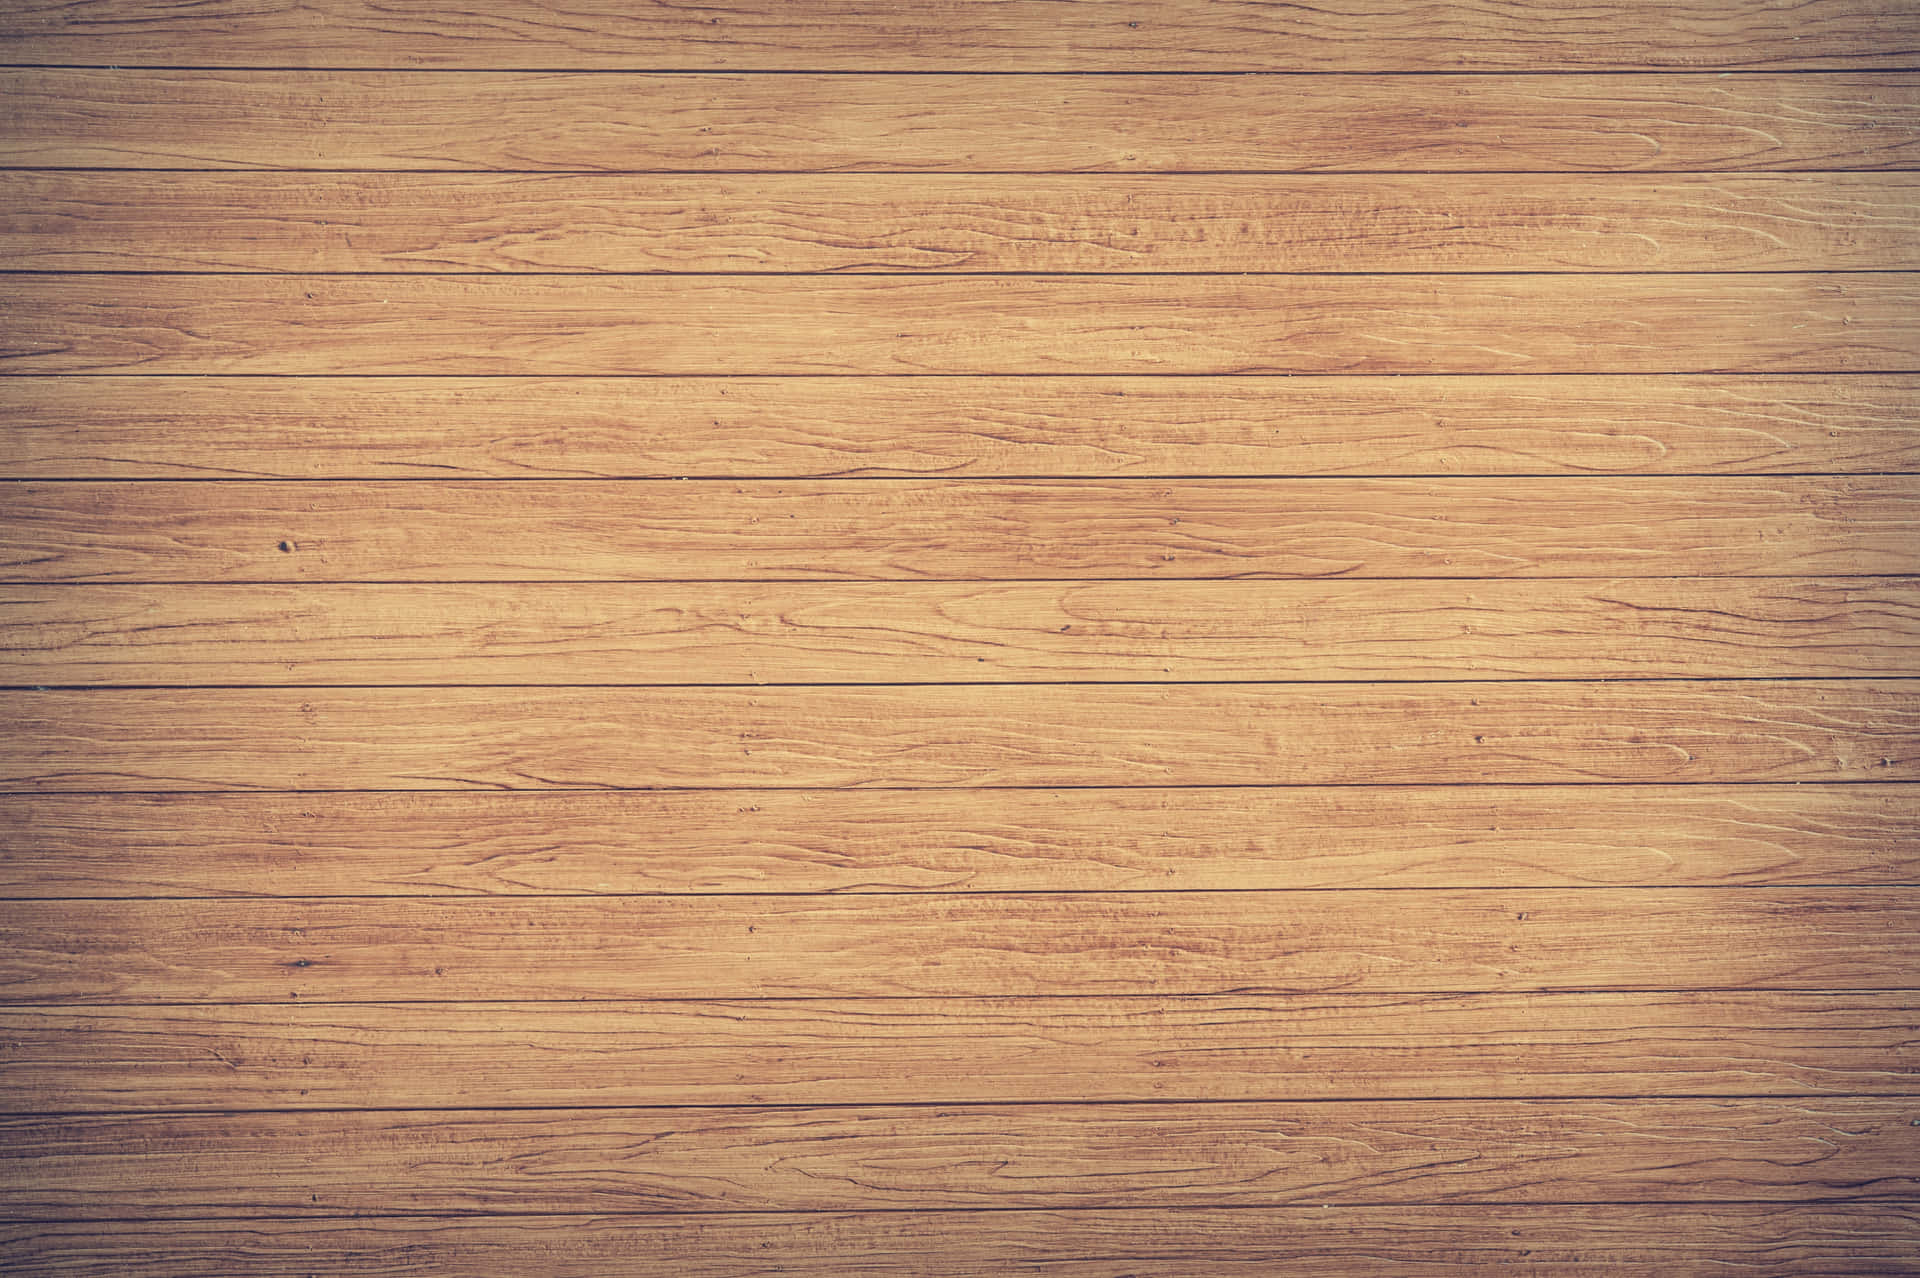 Wooden Floor Background With A Wooden Plank